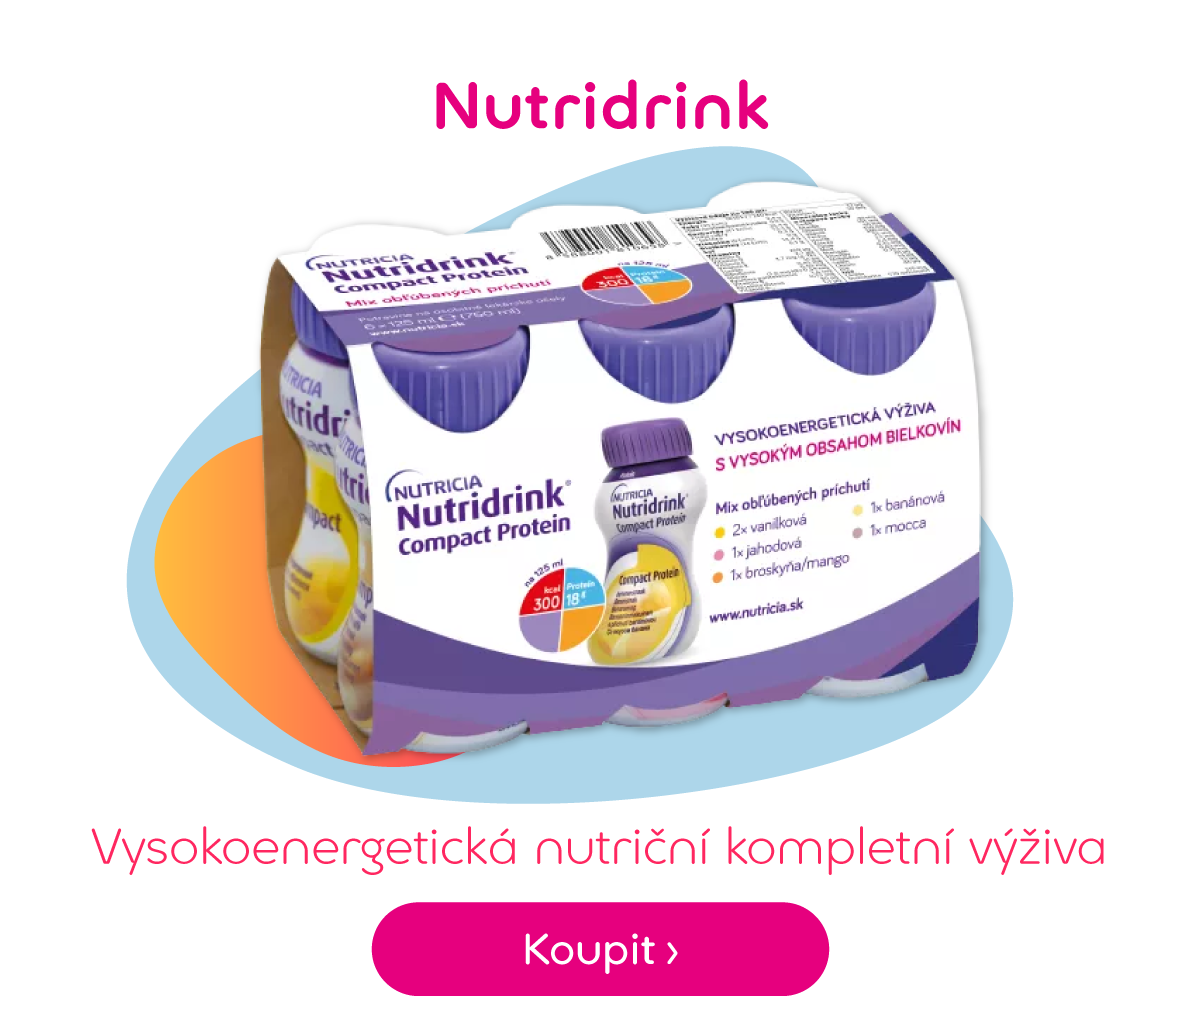 Nutridrink COMPACT